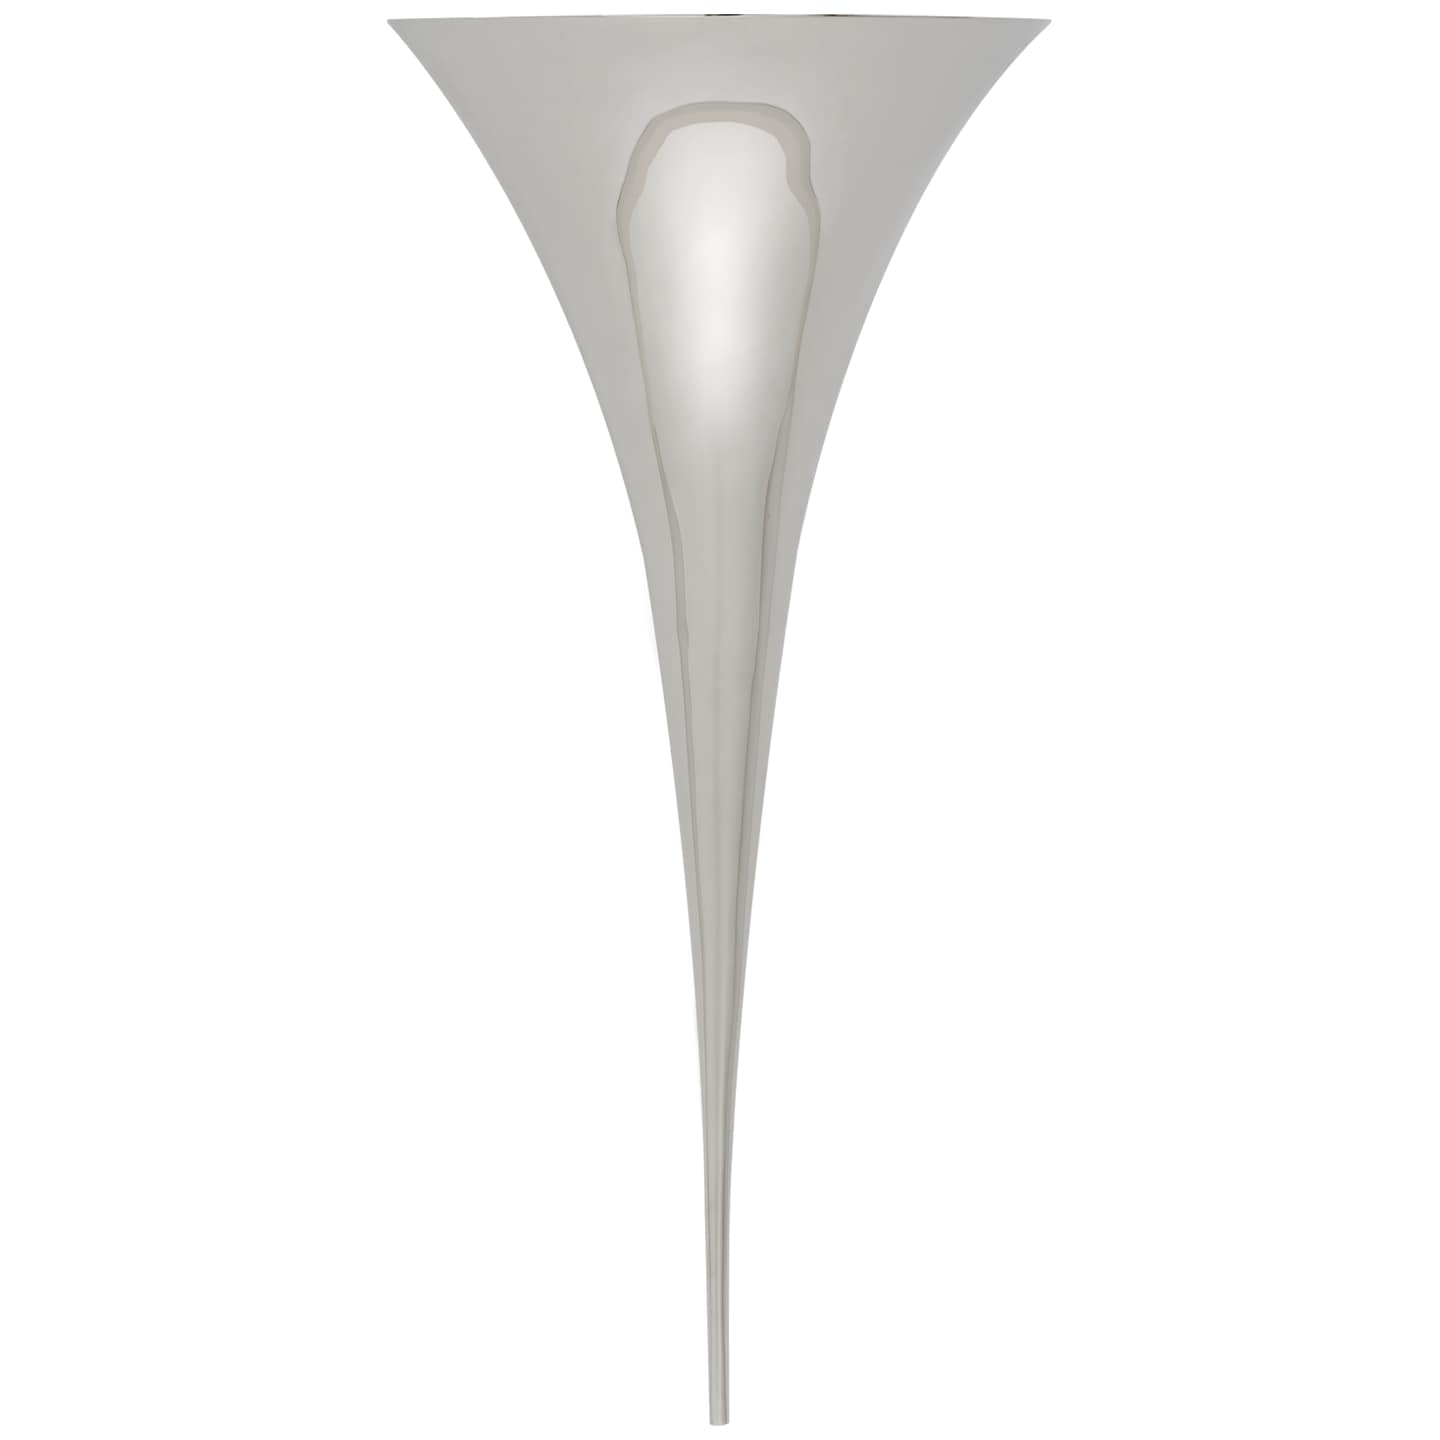 Alina Tail Sconce in Polished Nickel